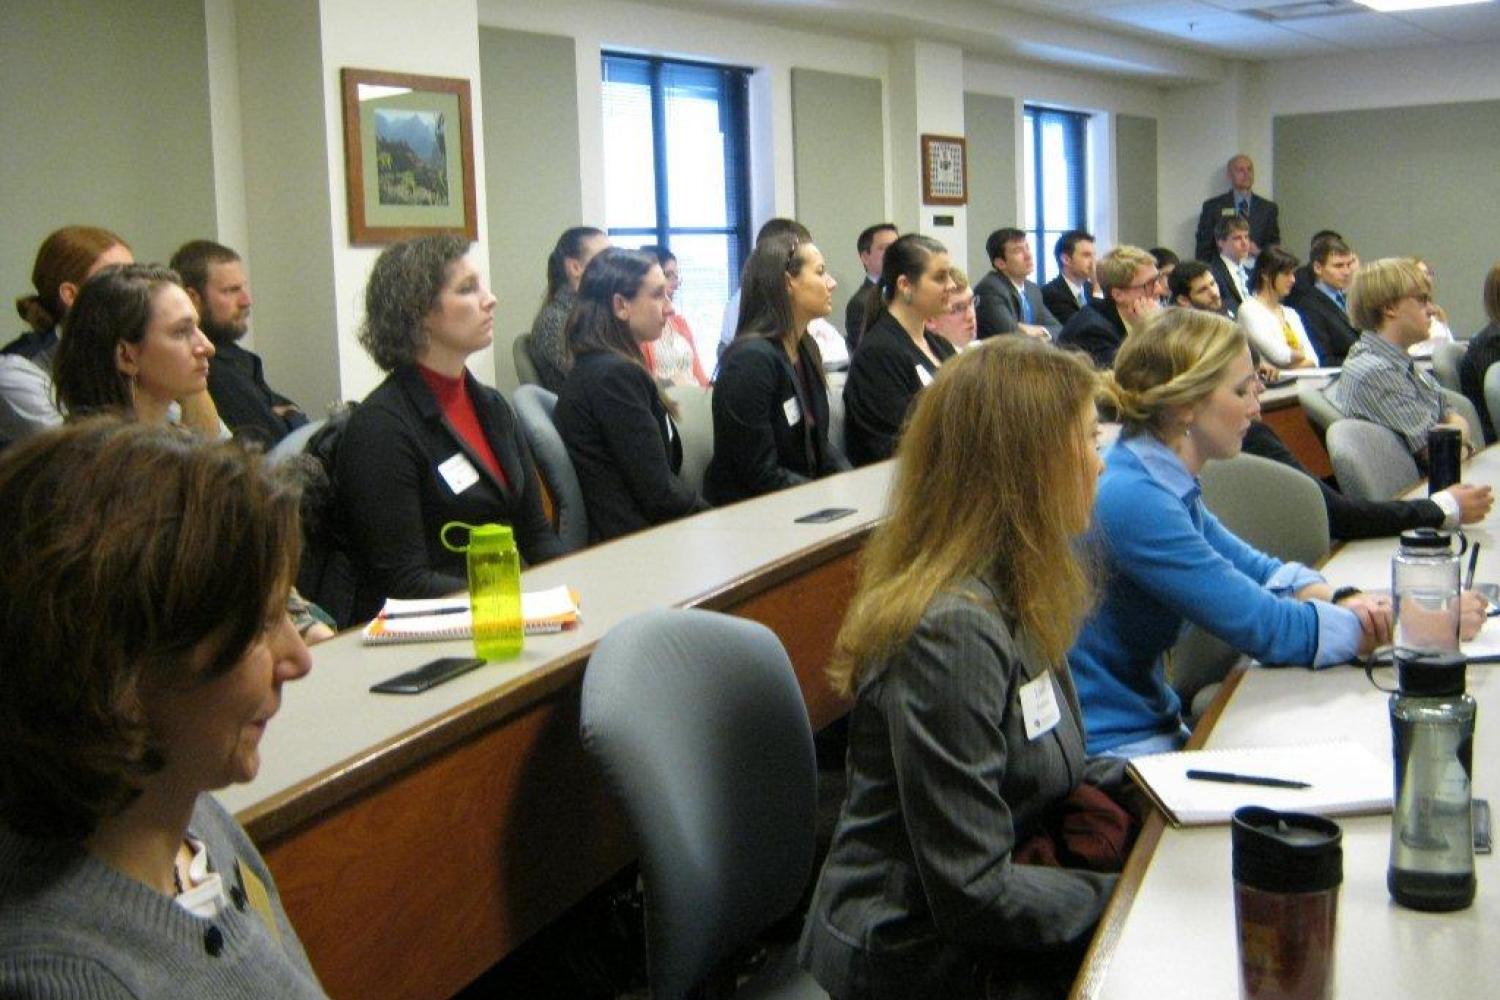 First-year students enjoyed the opportunity to hear about the job hunting experiences of members of the 2L class.